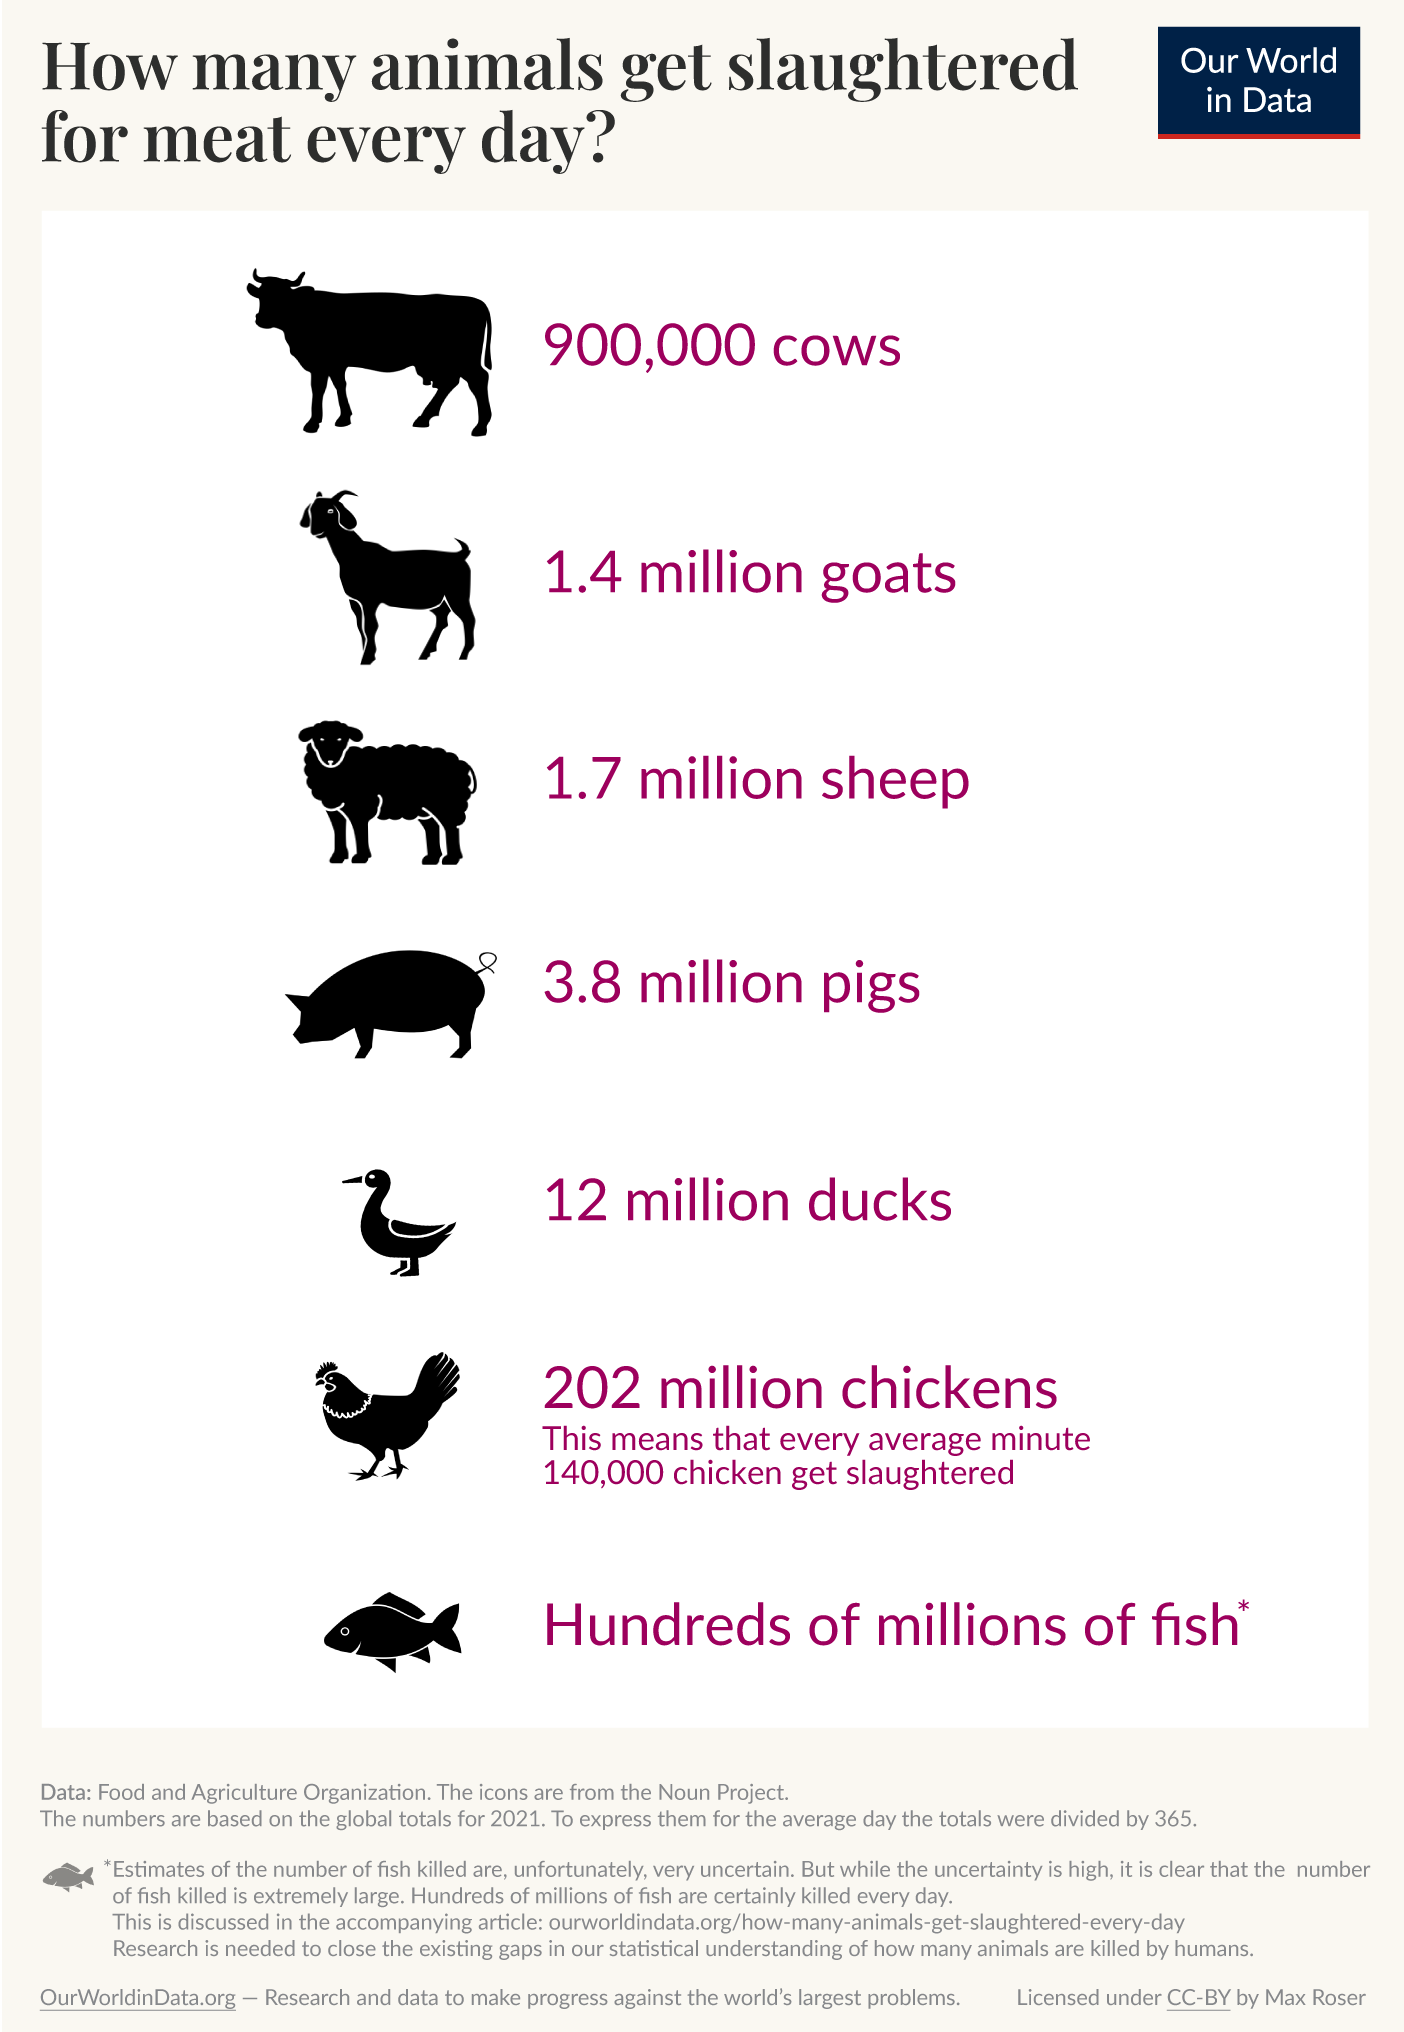 We today are living in a world in which we kill 900,000 cows, 1.4 million goats, 1.7 million sheep, 3.8 million pigs, and more than 200 million chicken every day